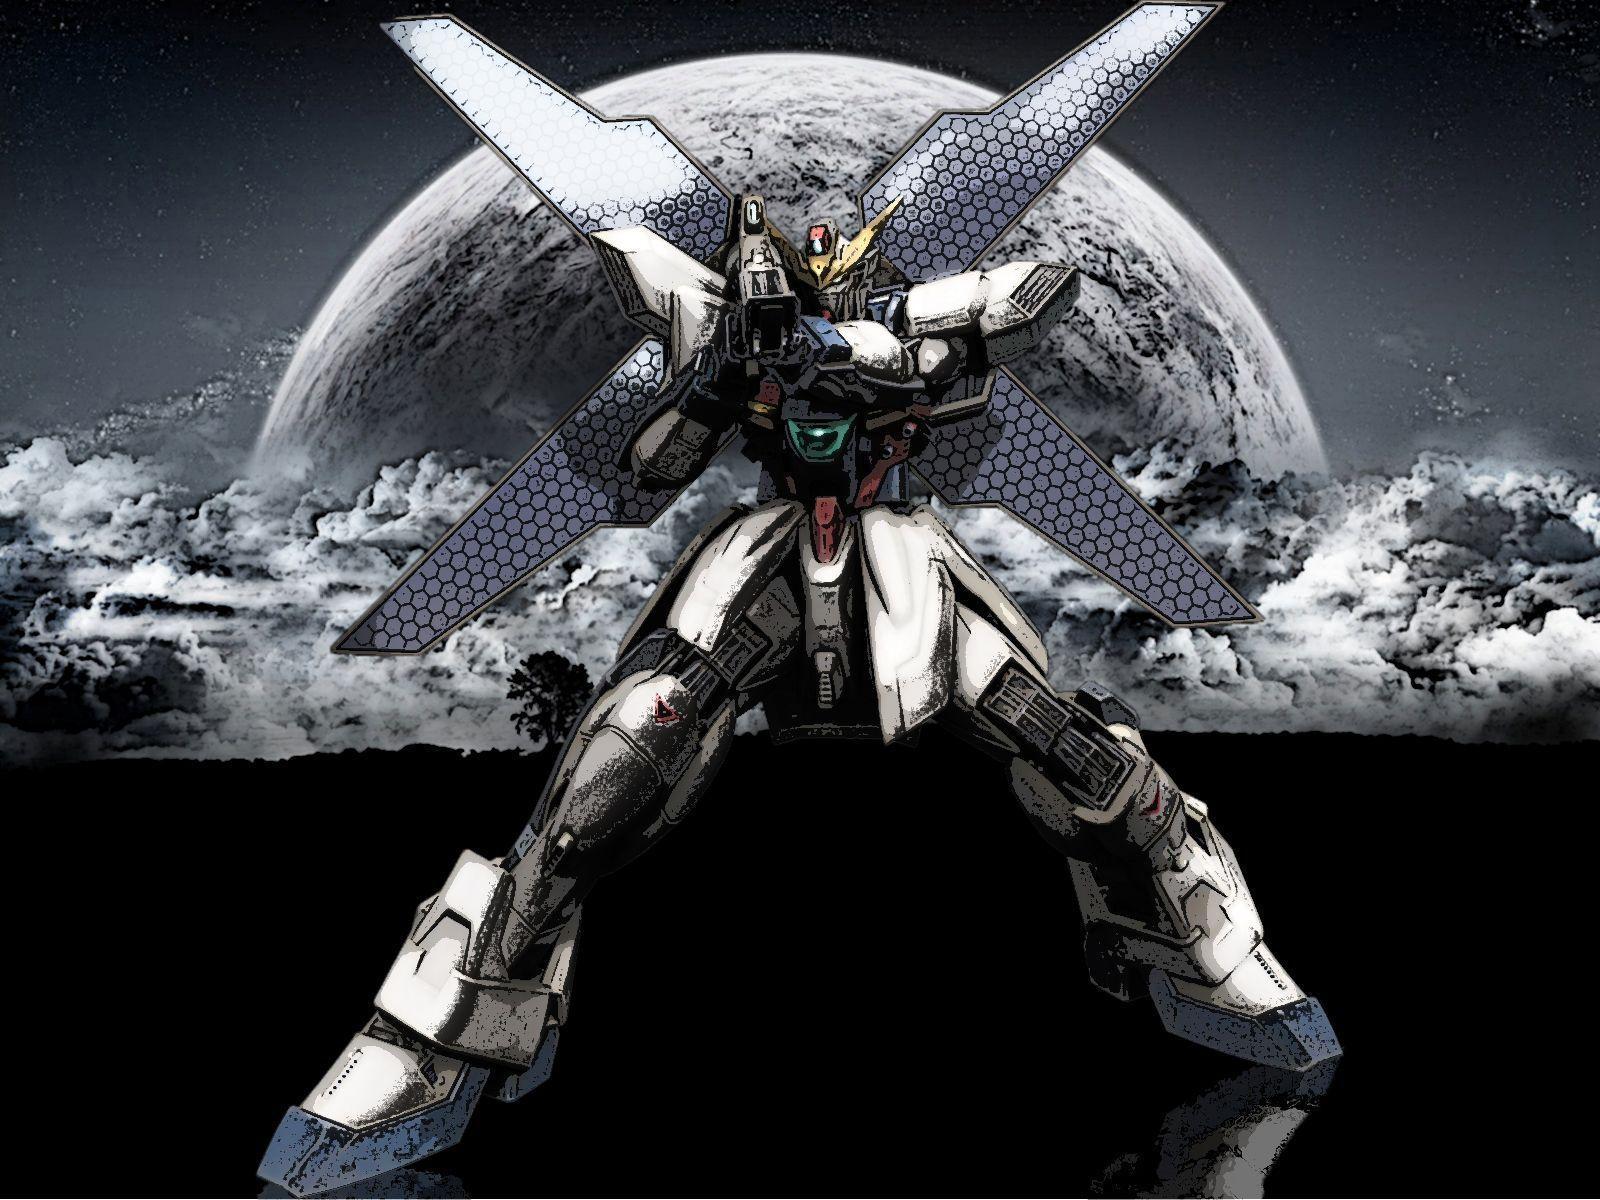 Download Gundam Wallpaper For iPhone Full Size. Free Game